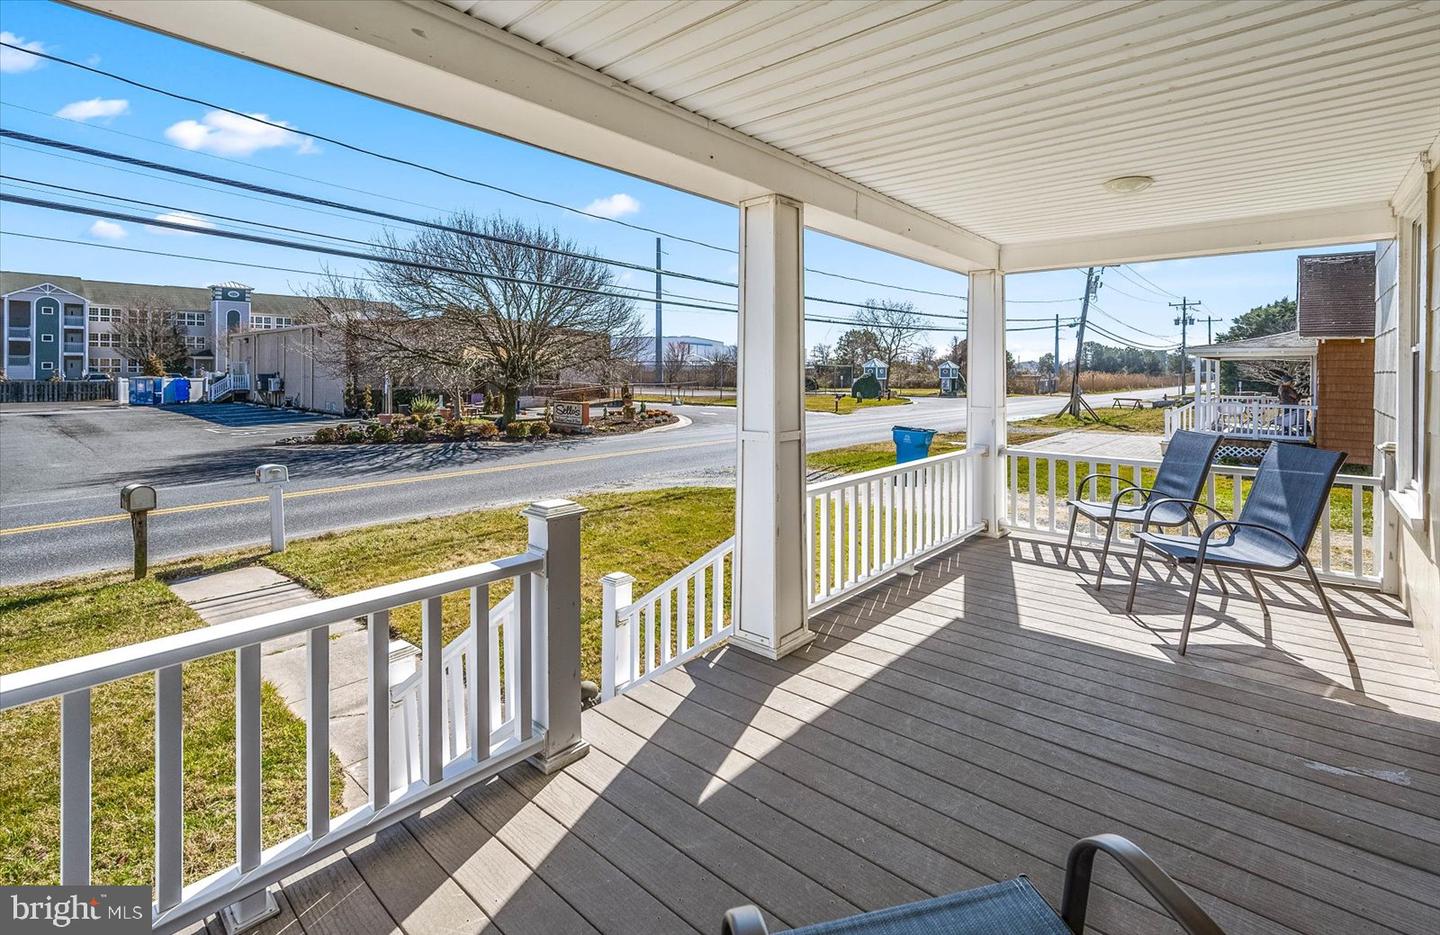 MDWO2019446-802902745436-2024-03-07-00-08-03 9801 / 9805 Golf Course Rd | Ocean City, MD Real Estate For Sale | MLS# Mdwo2019446  - 1st Choice Properties